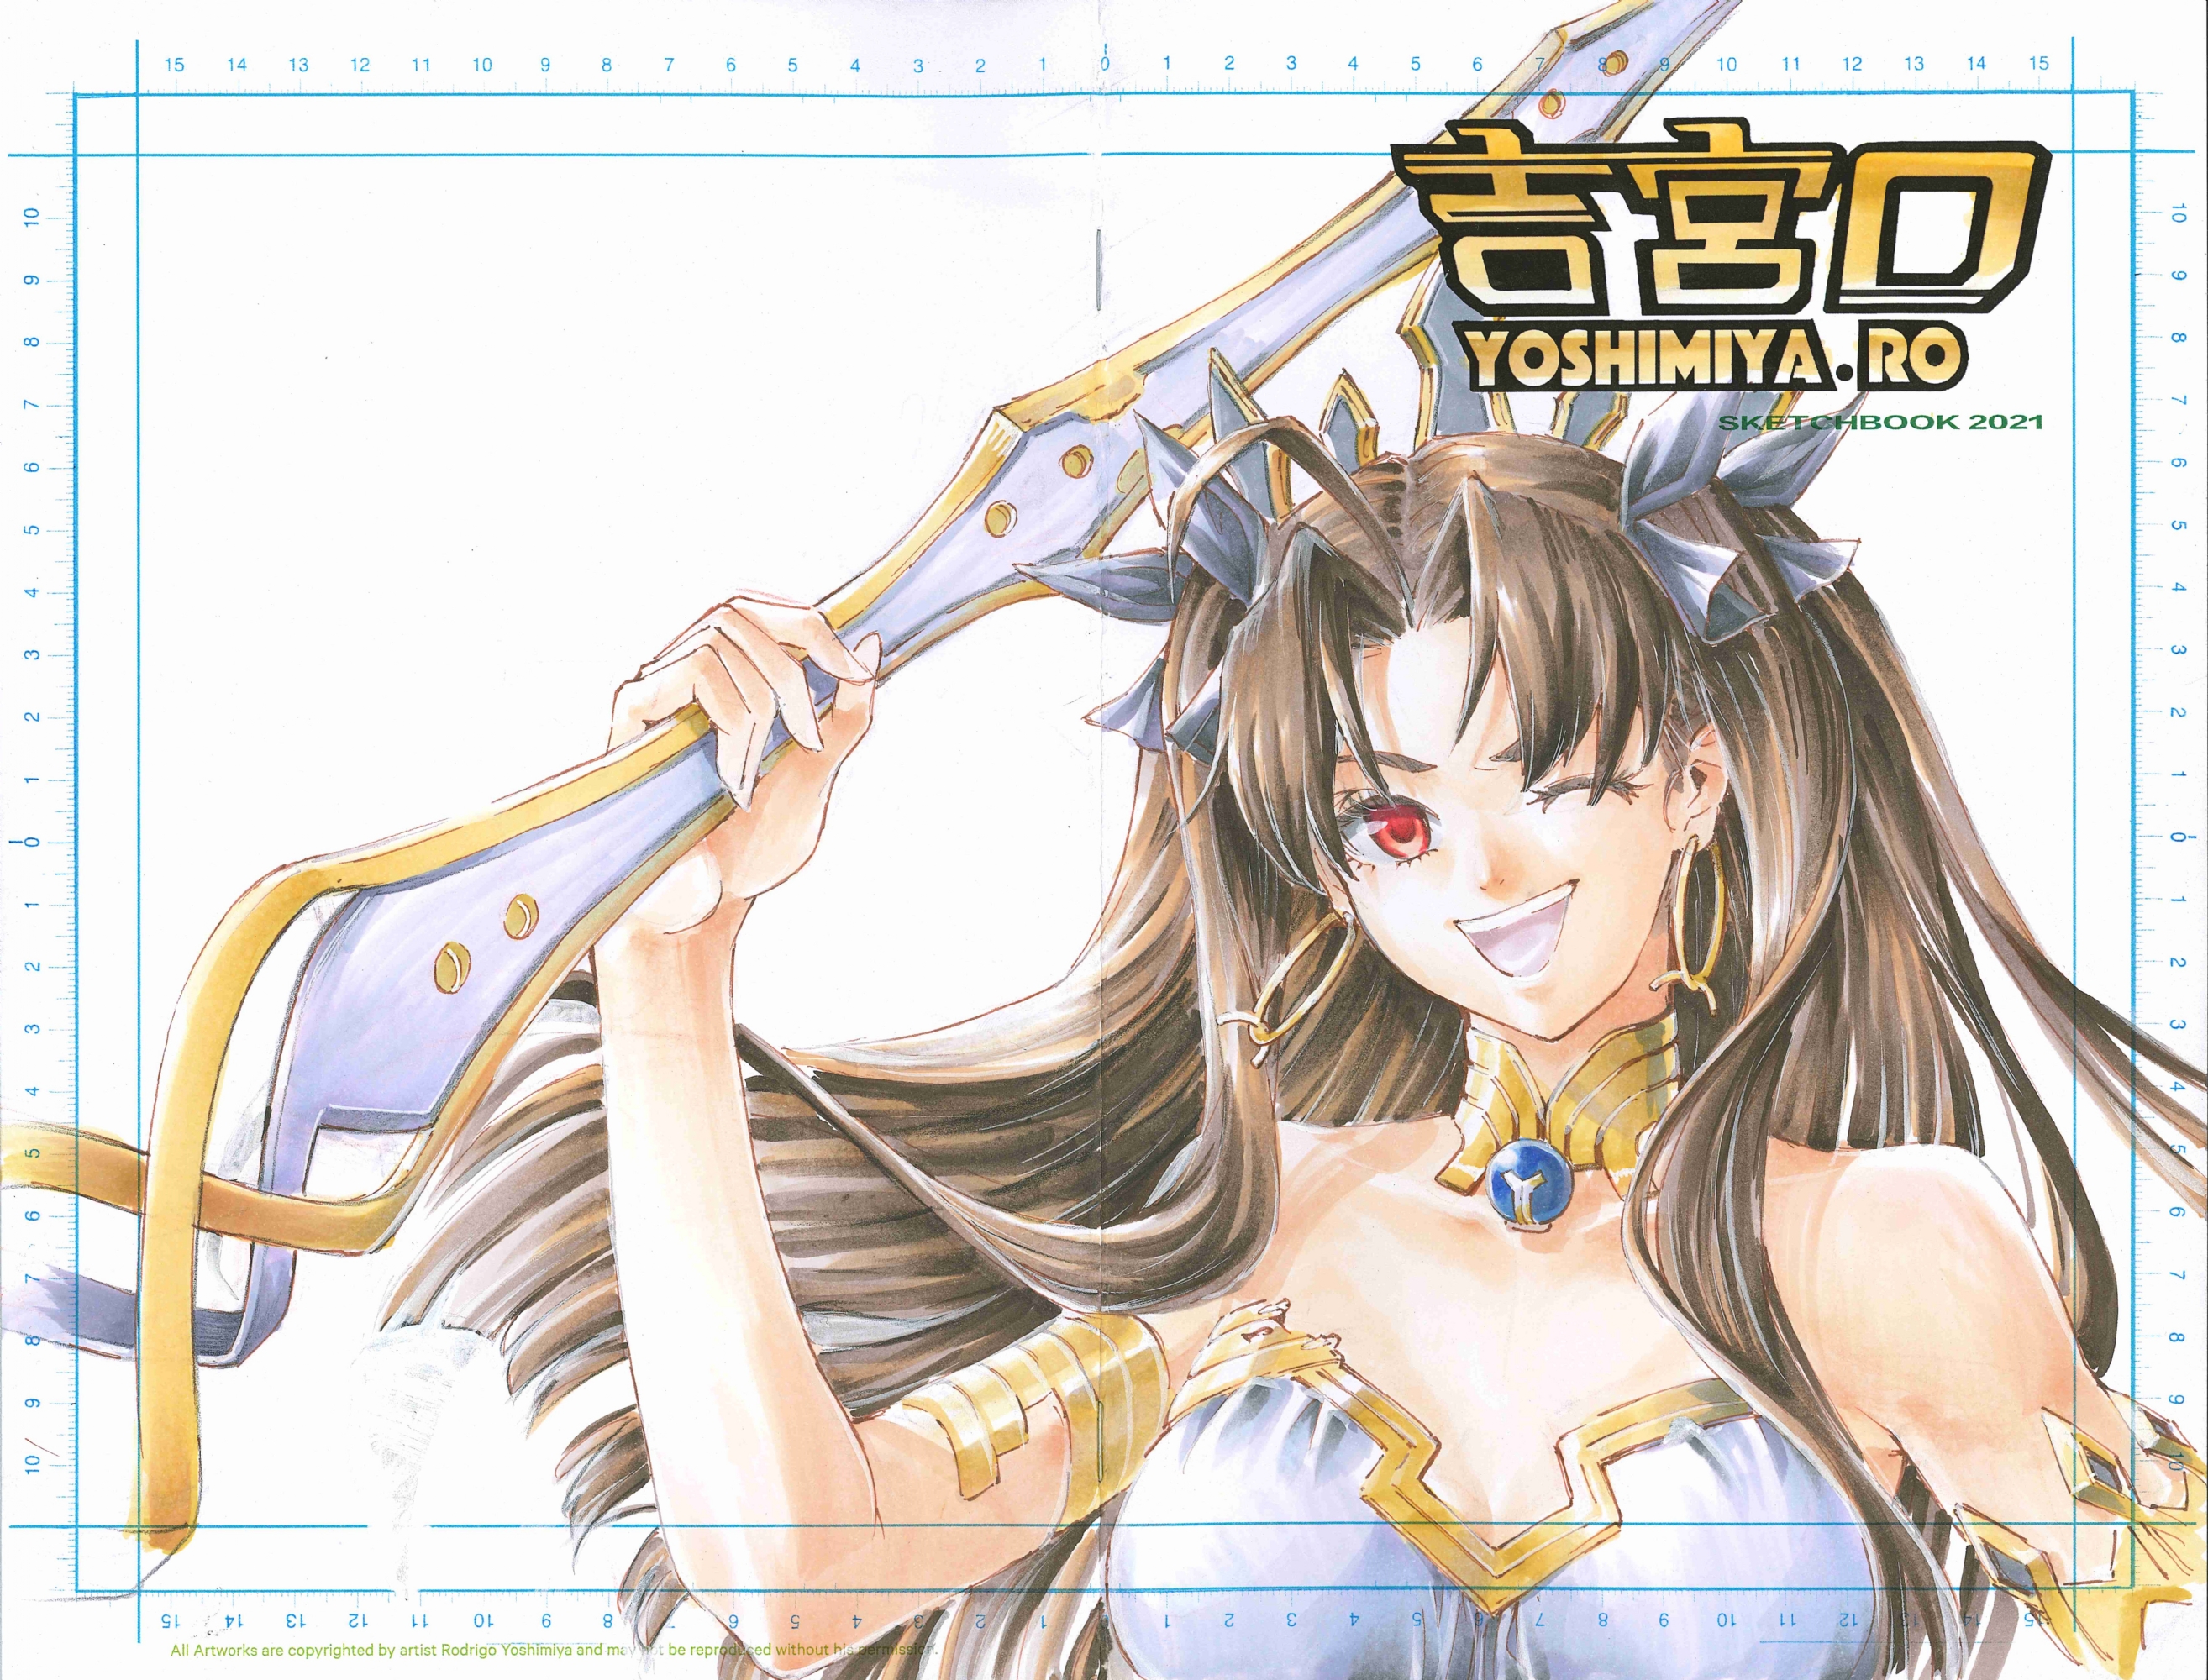 Fate/Grand Order - Absolute Demon Battlefront: Babylonia] Mouse Pad Design  06 (Ishtar) (Anime Toy) Hi-Res image list